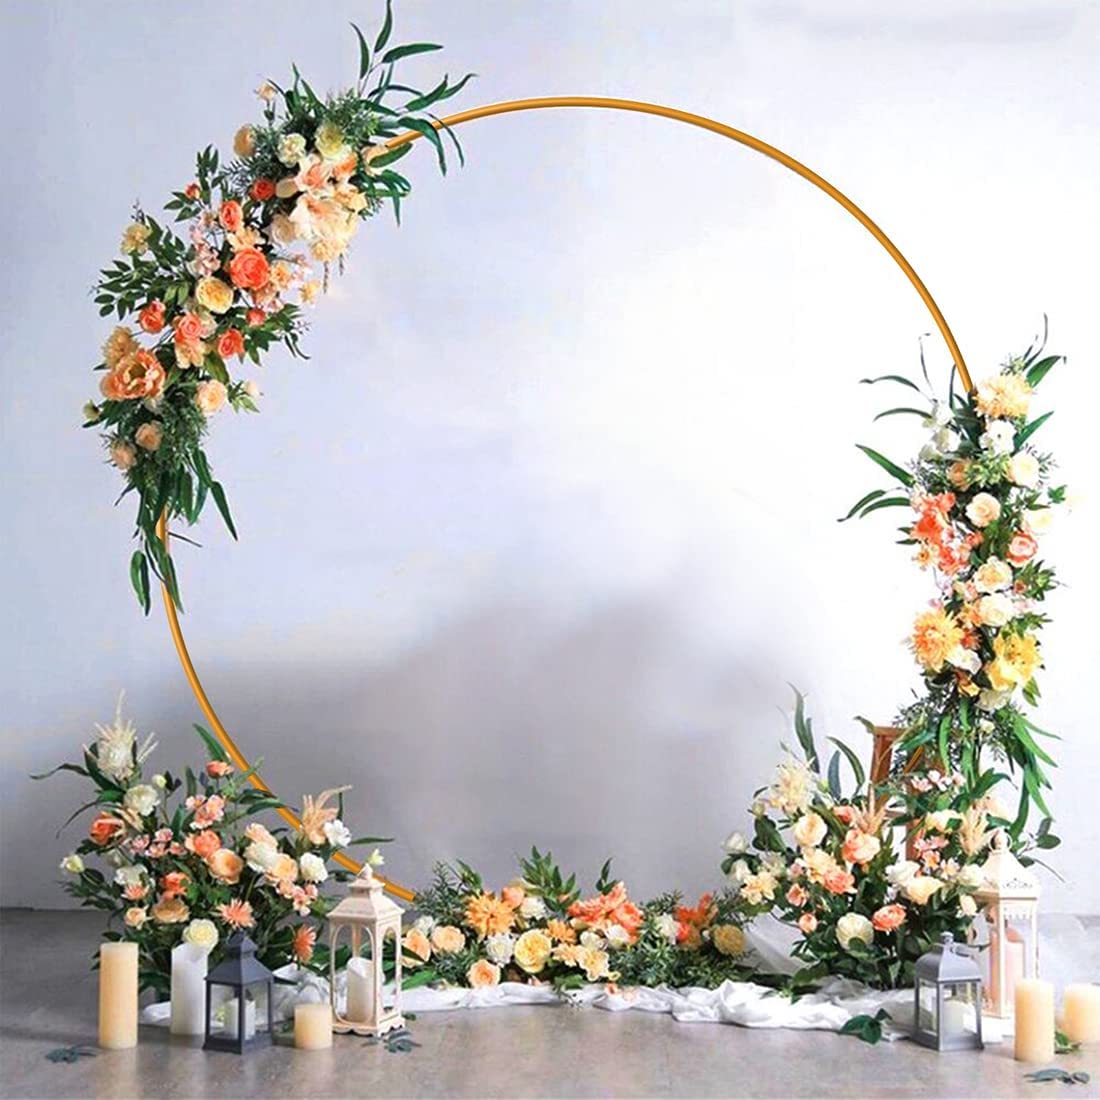 Round Backdrop Stands Metal Circle Arch Stand for Birthday Party Wedding PR8